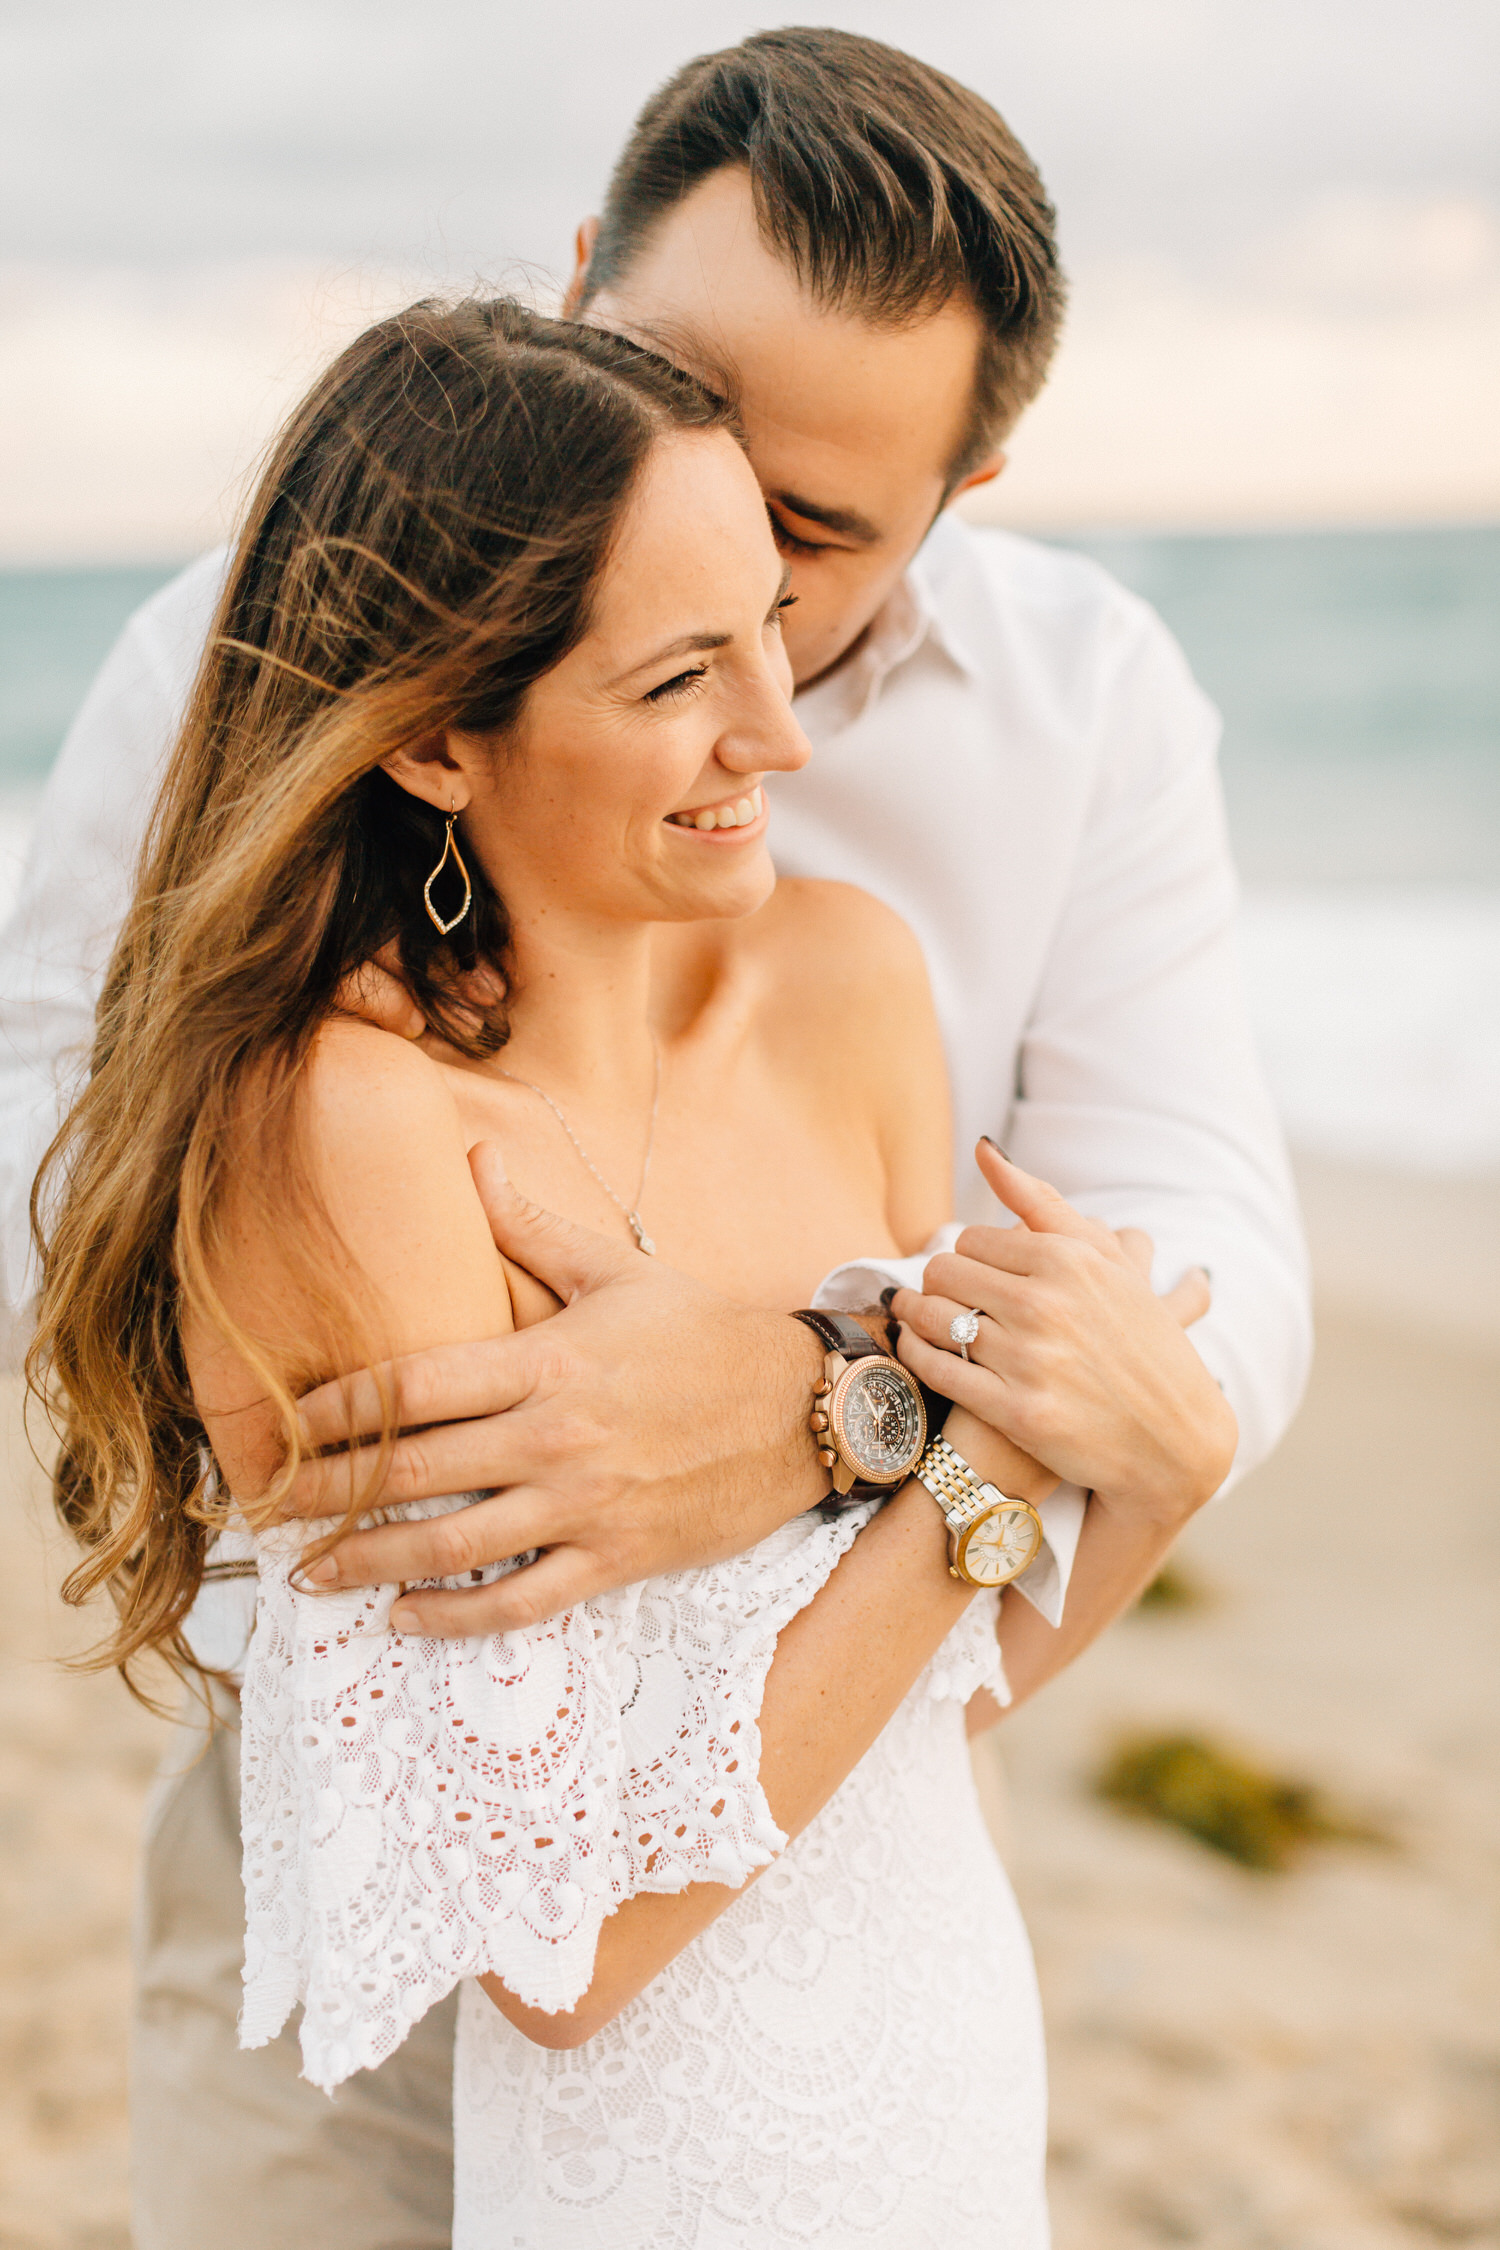 Engagement Photography on Worth Avenue in Palm Beach, FL – LukasG